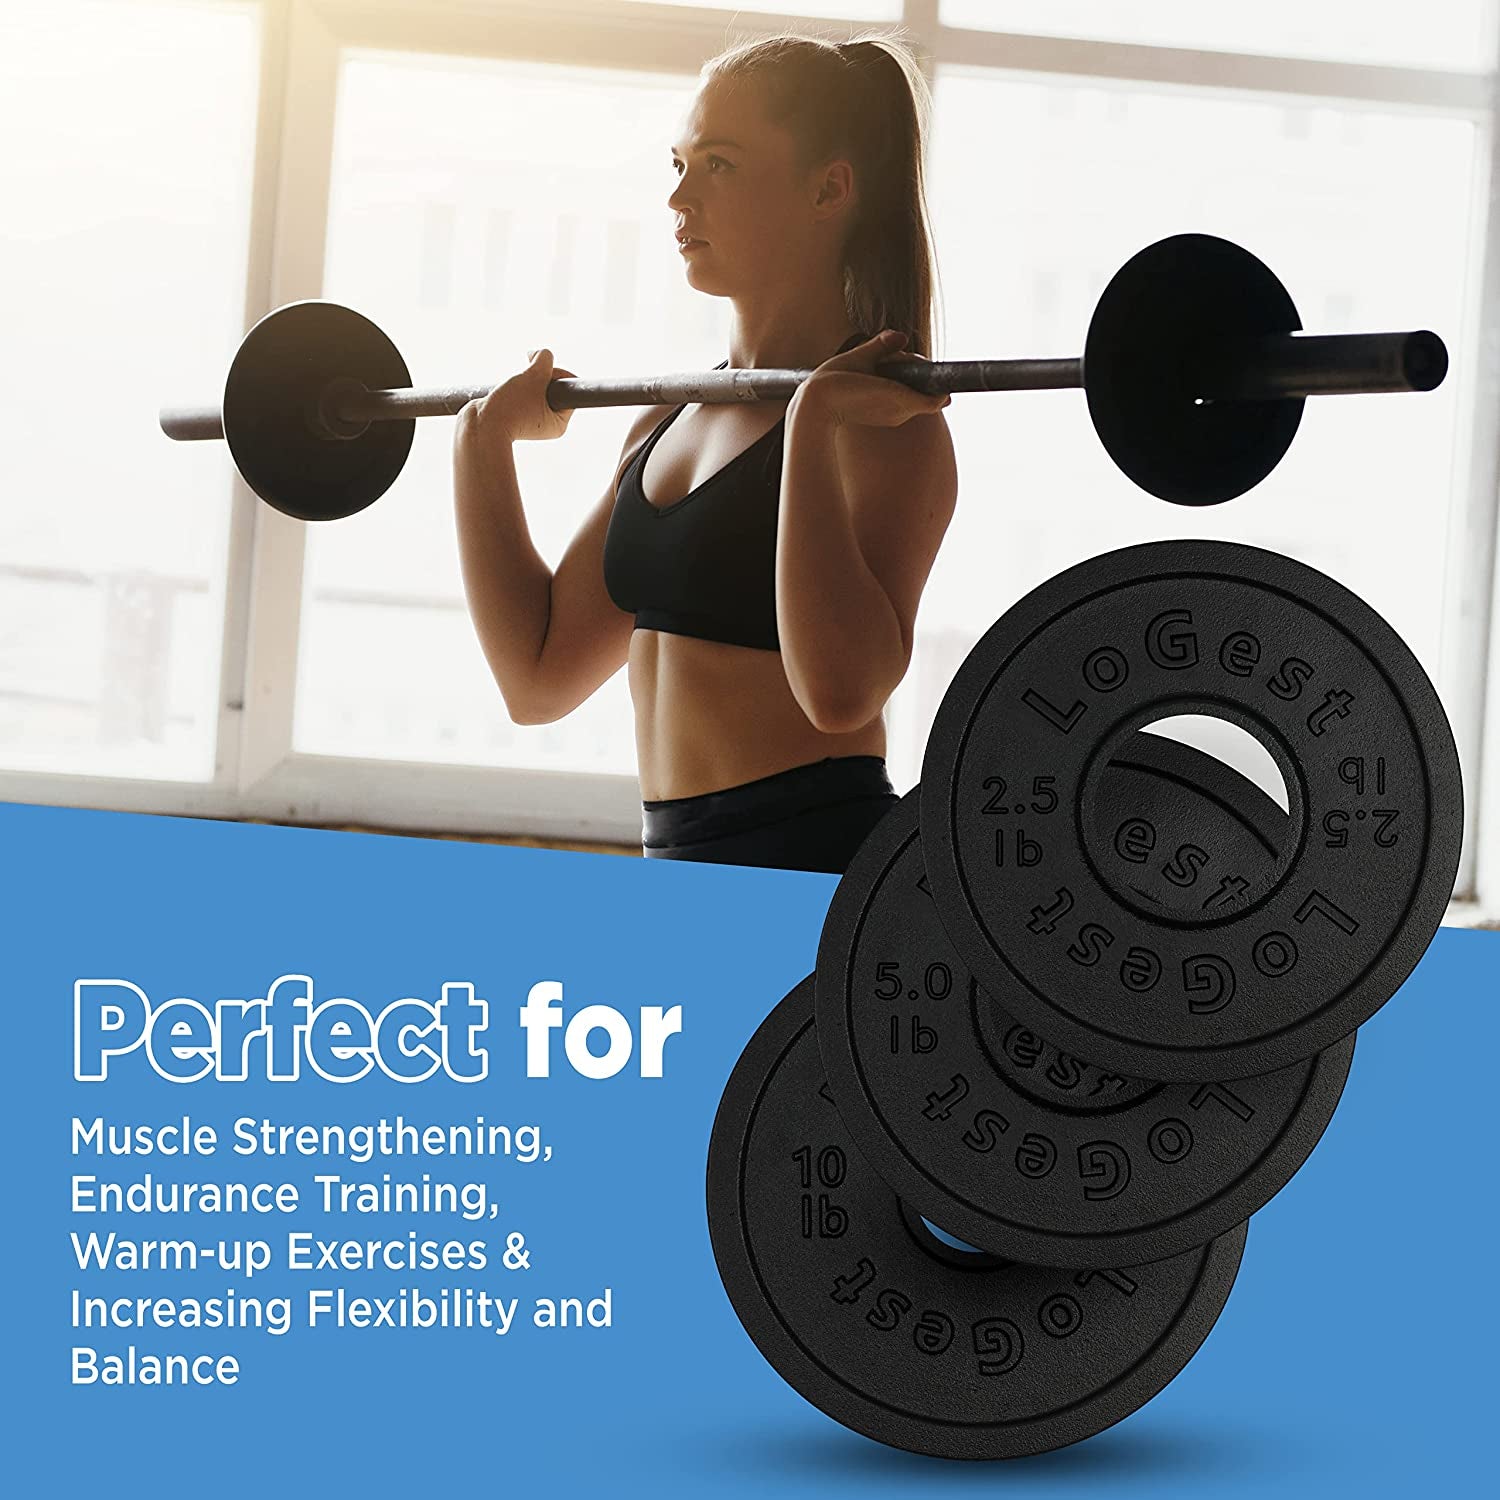 Pair Olympic Plates - Barbell Weights Set of 2 Weight Plates for Olympic Bars Perfect for Strength Training Plates Exercise Balance Available in 2.5LB 5LB 10LB Weight Plate